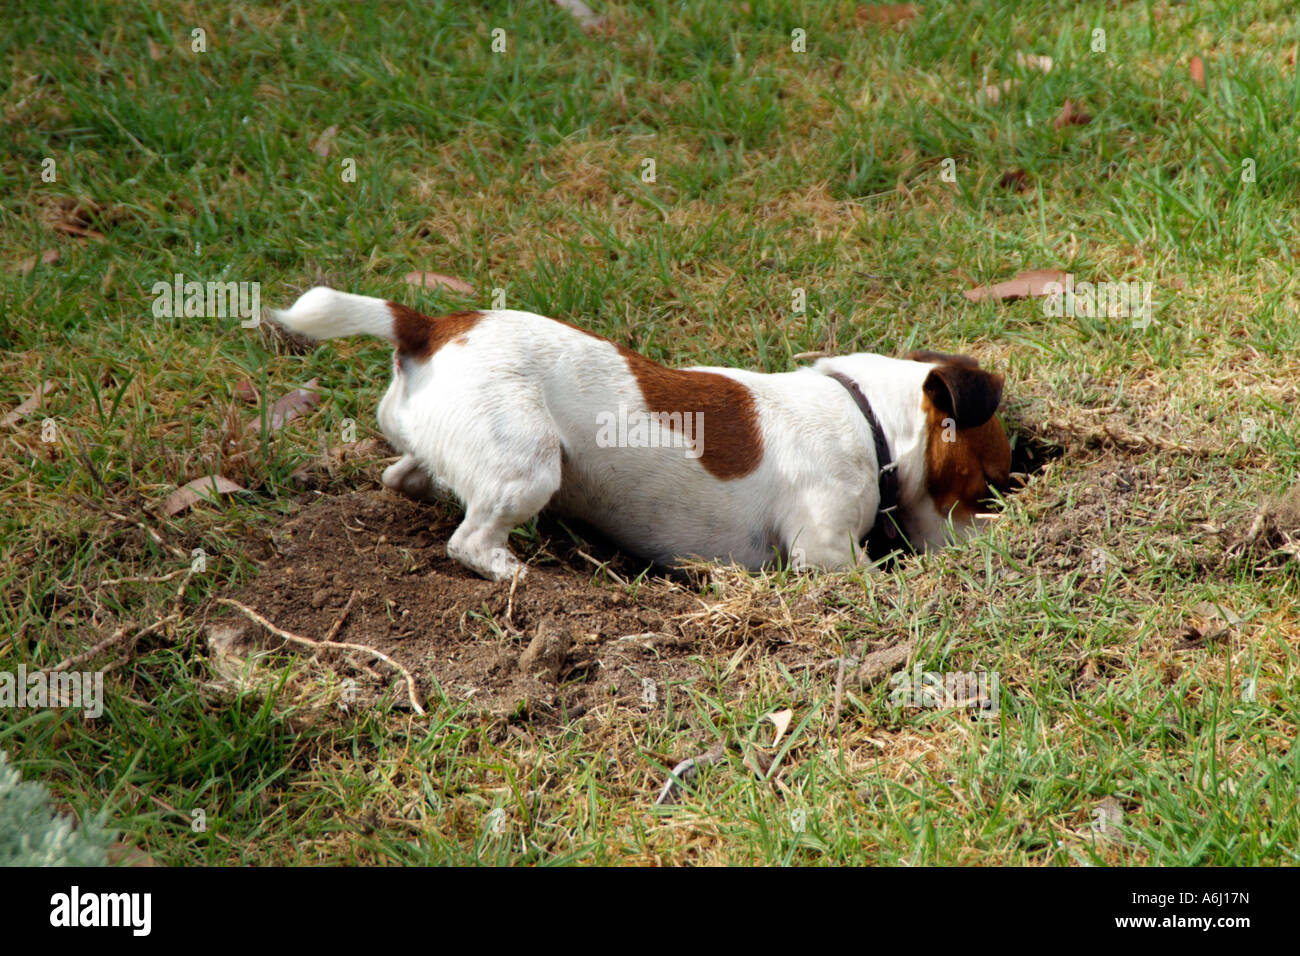 Jack Russell Terrier brown and white short haired dog Digging Stock Photo -  Alamy